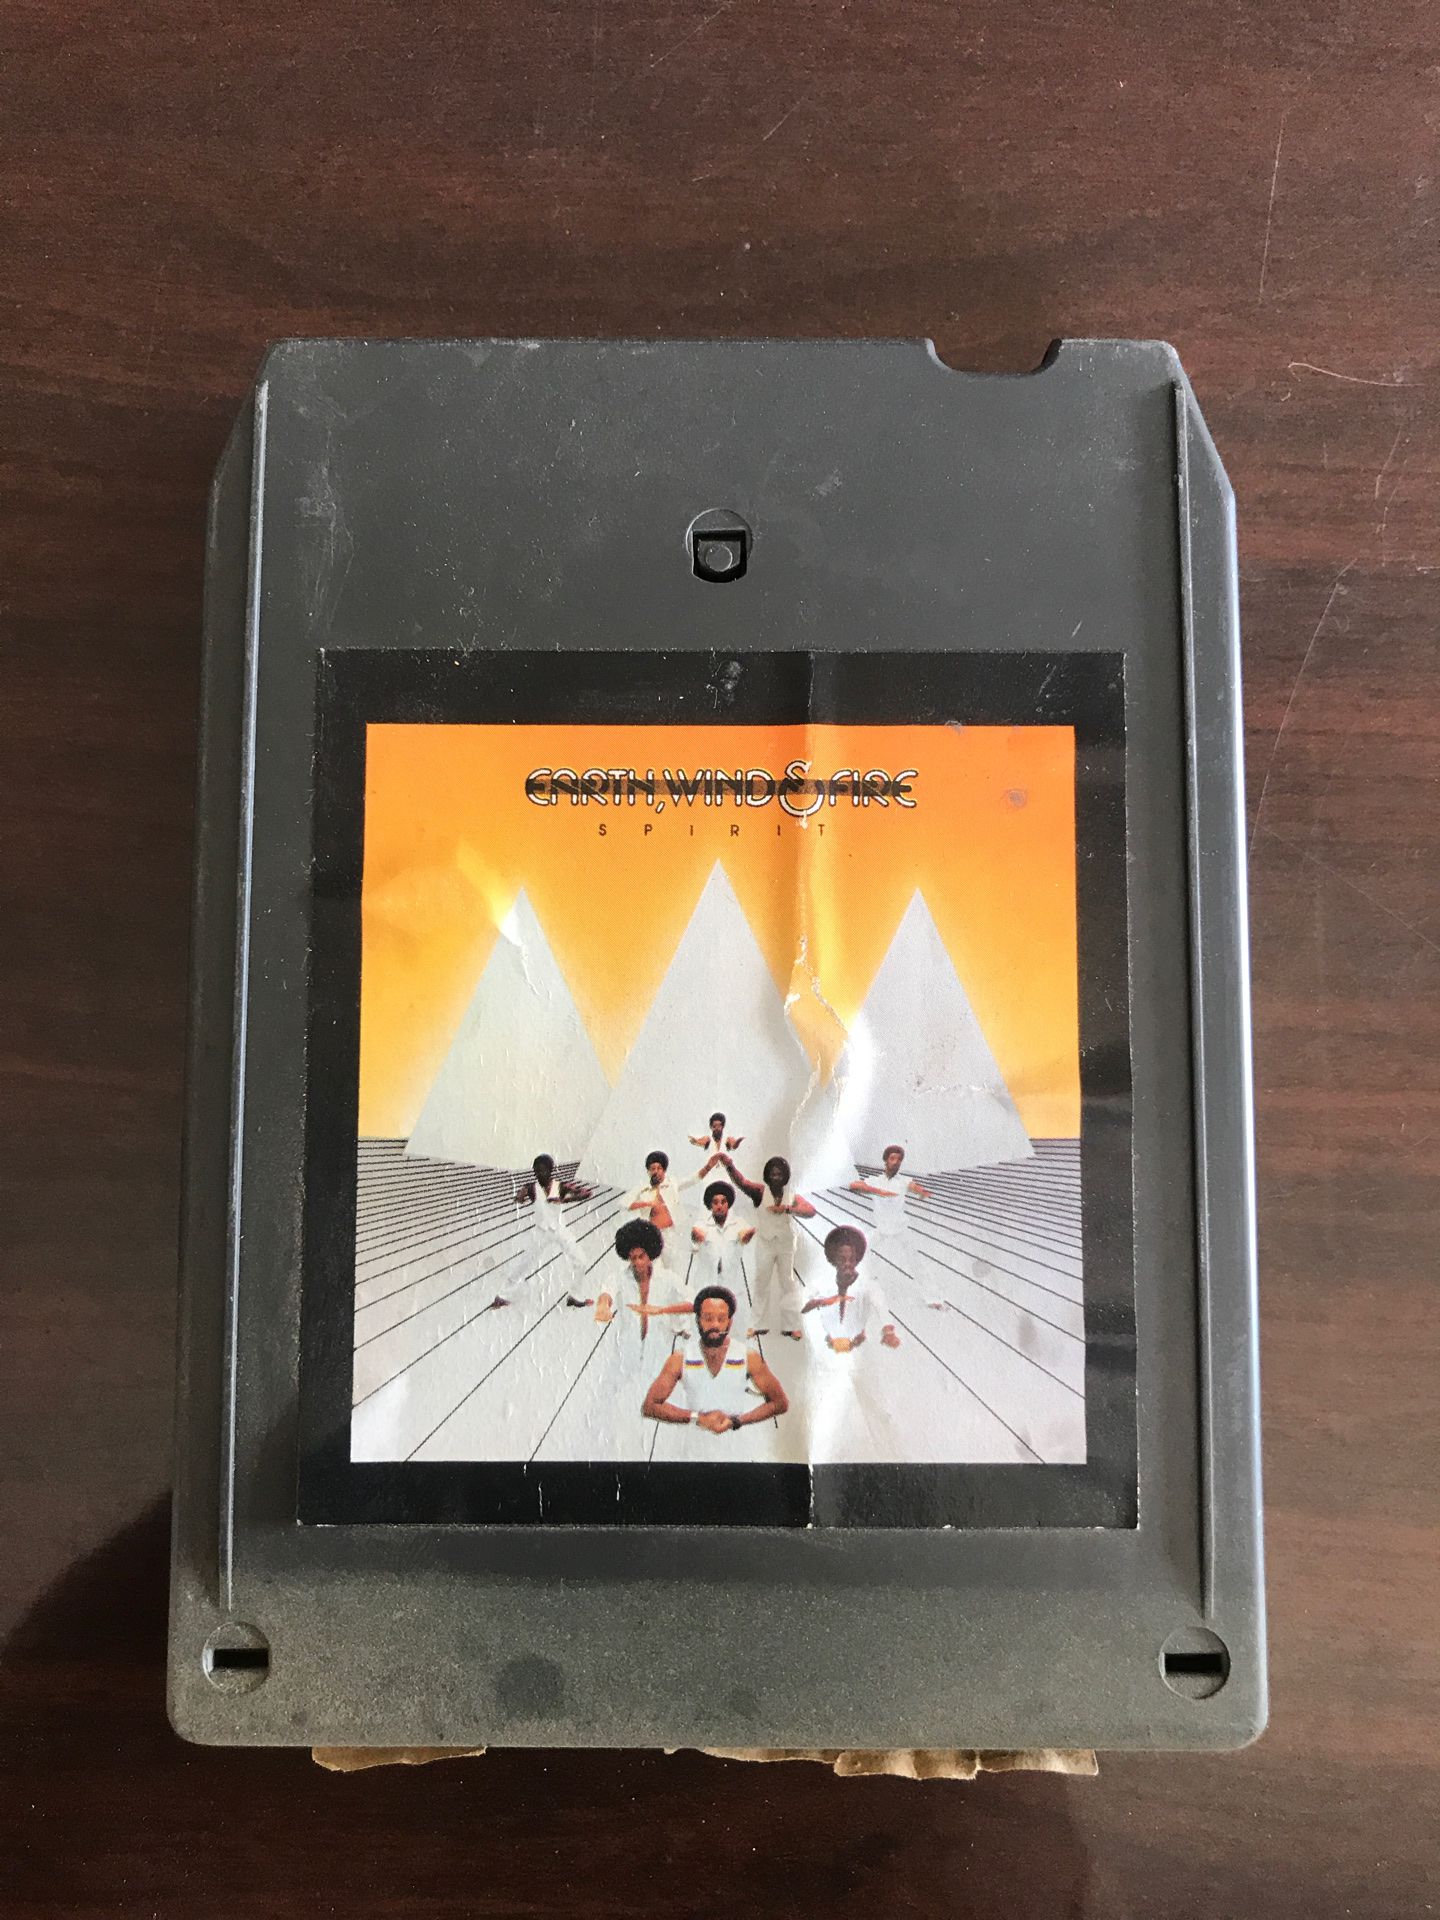 8-Track Earth Wind and Fire